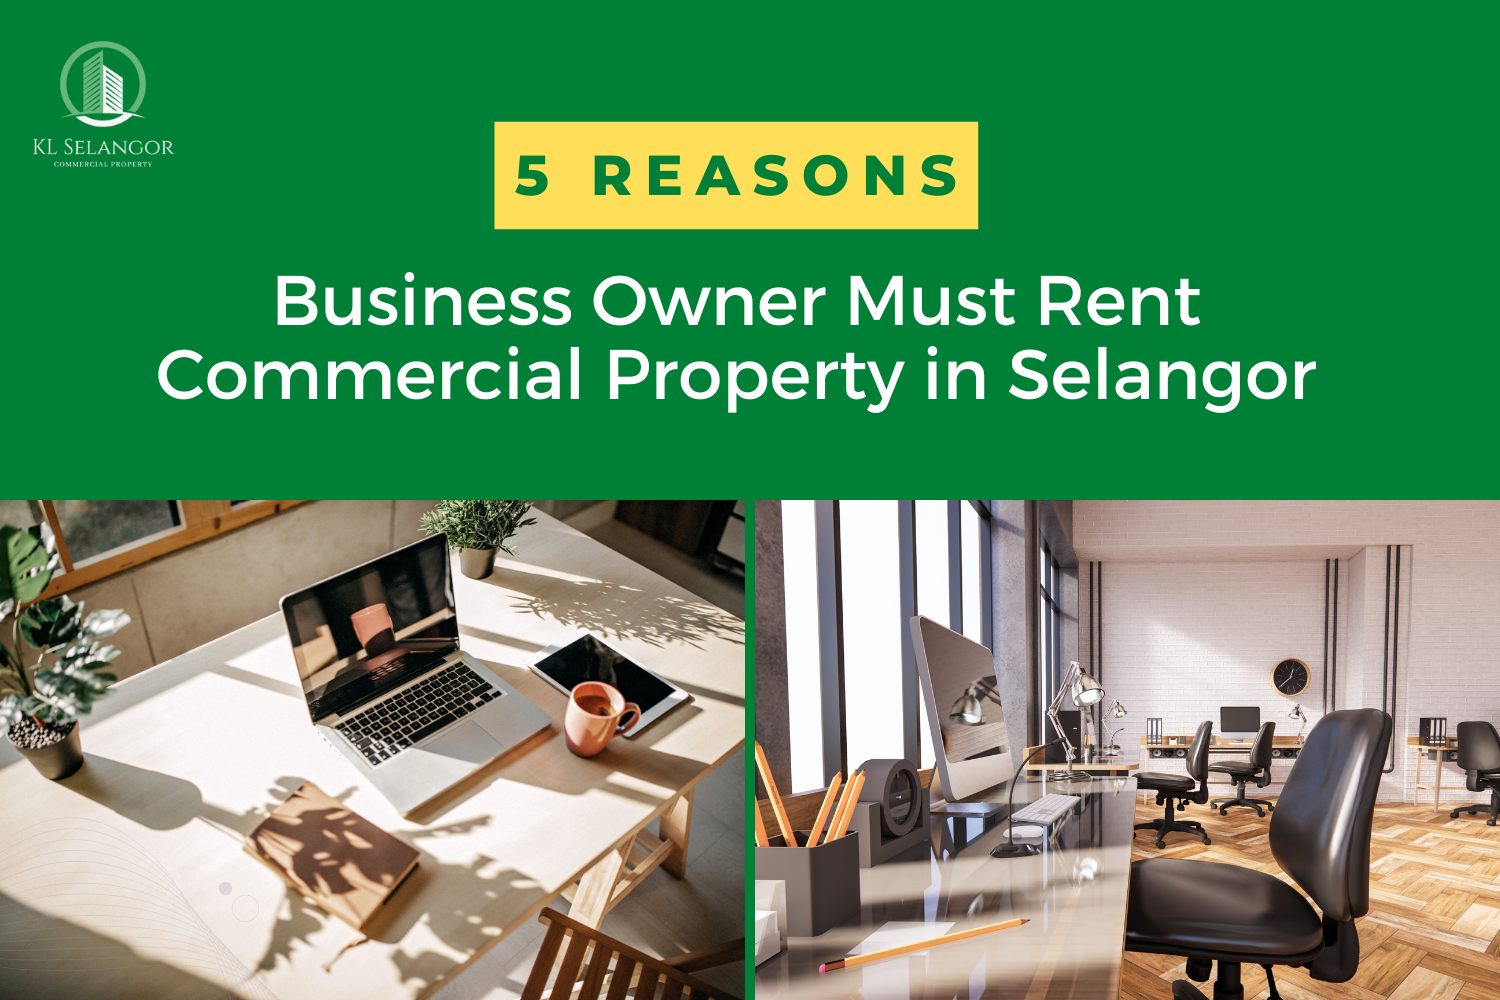 5 Reasons Business Owner Must Rent Commercial Property in Selangor